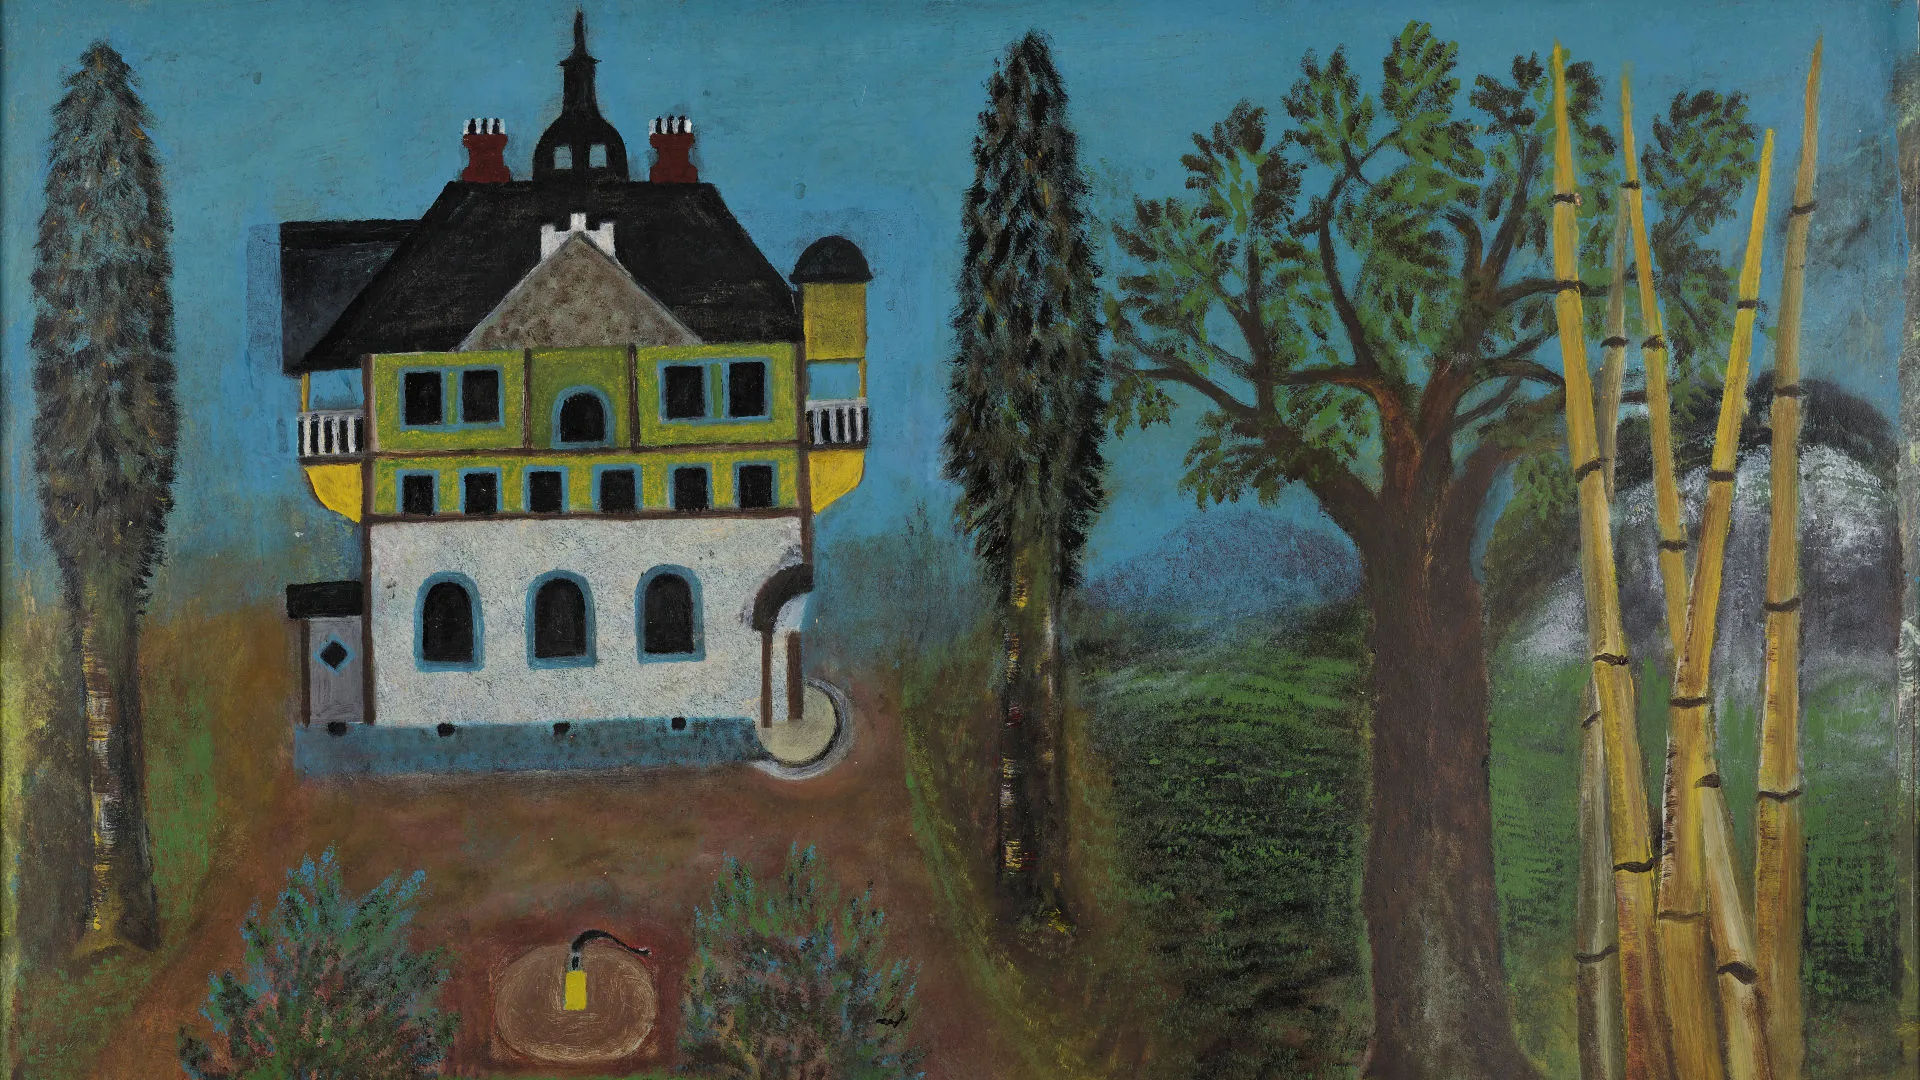 A painting of a house.